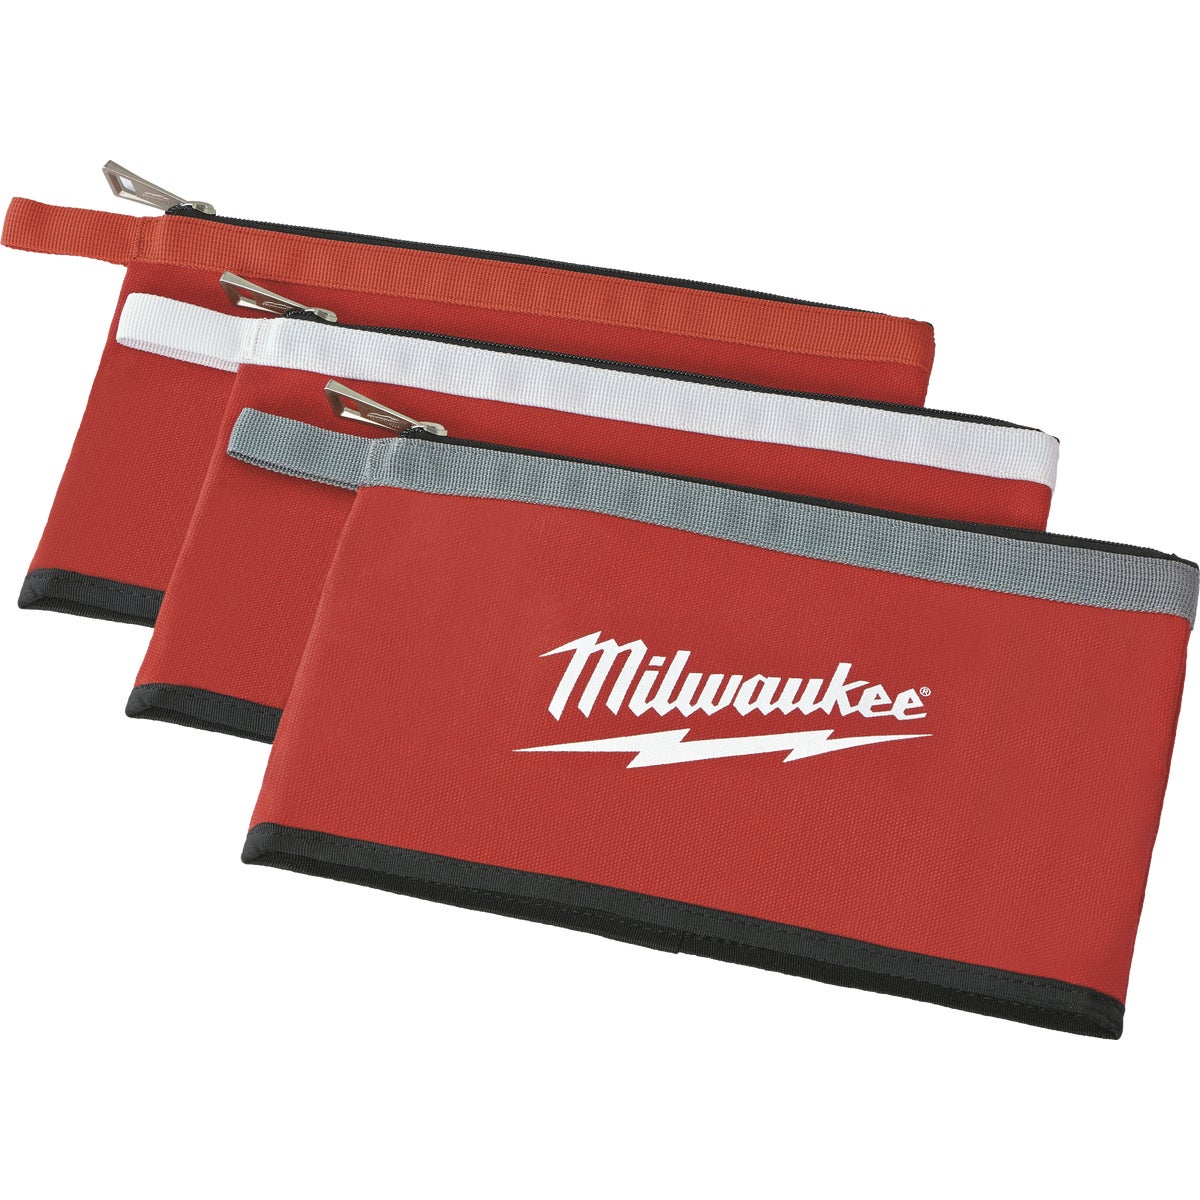 Item 378163, Milwaukee Zipper Pouches feature a breathable and durable heavy-duty No.